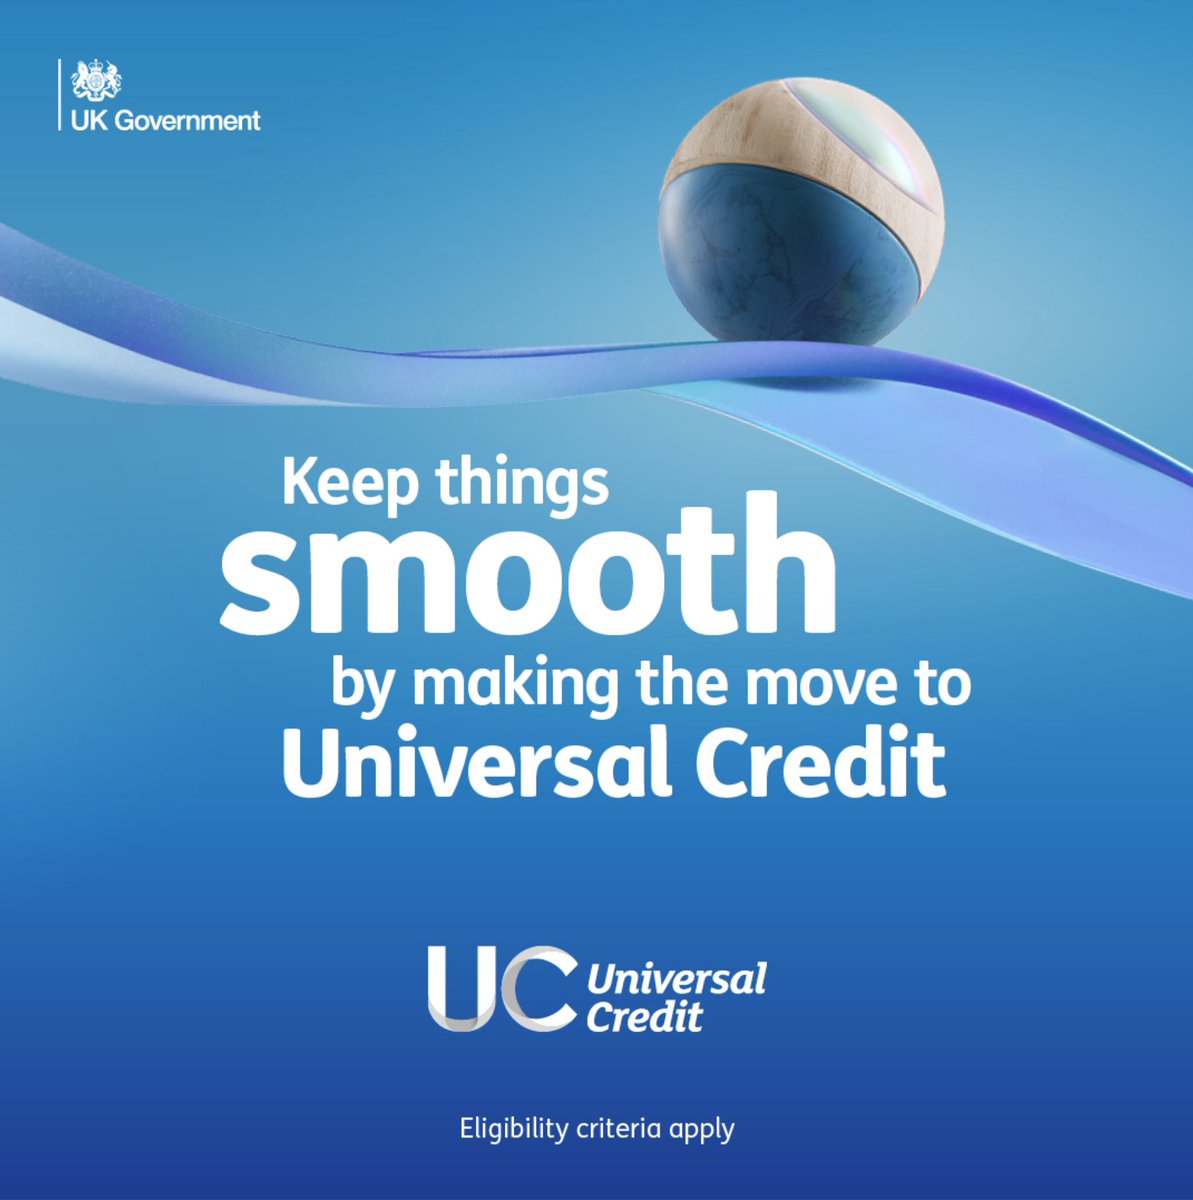 Are you receiving benefits or tax credits? Some benefits & tax credits are ending and being replaced by Universal Credit. It won’t be automatic- look out for a letter from @DWPgovuk ❗It's important that you don't do anything until you receive the letter. bit.ly/3Q9Nn5m